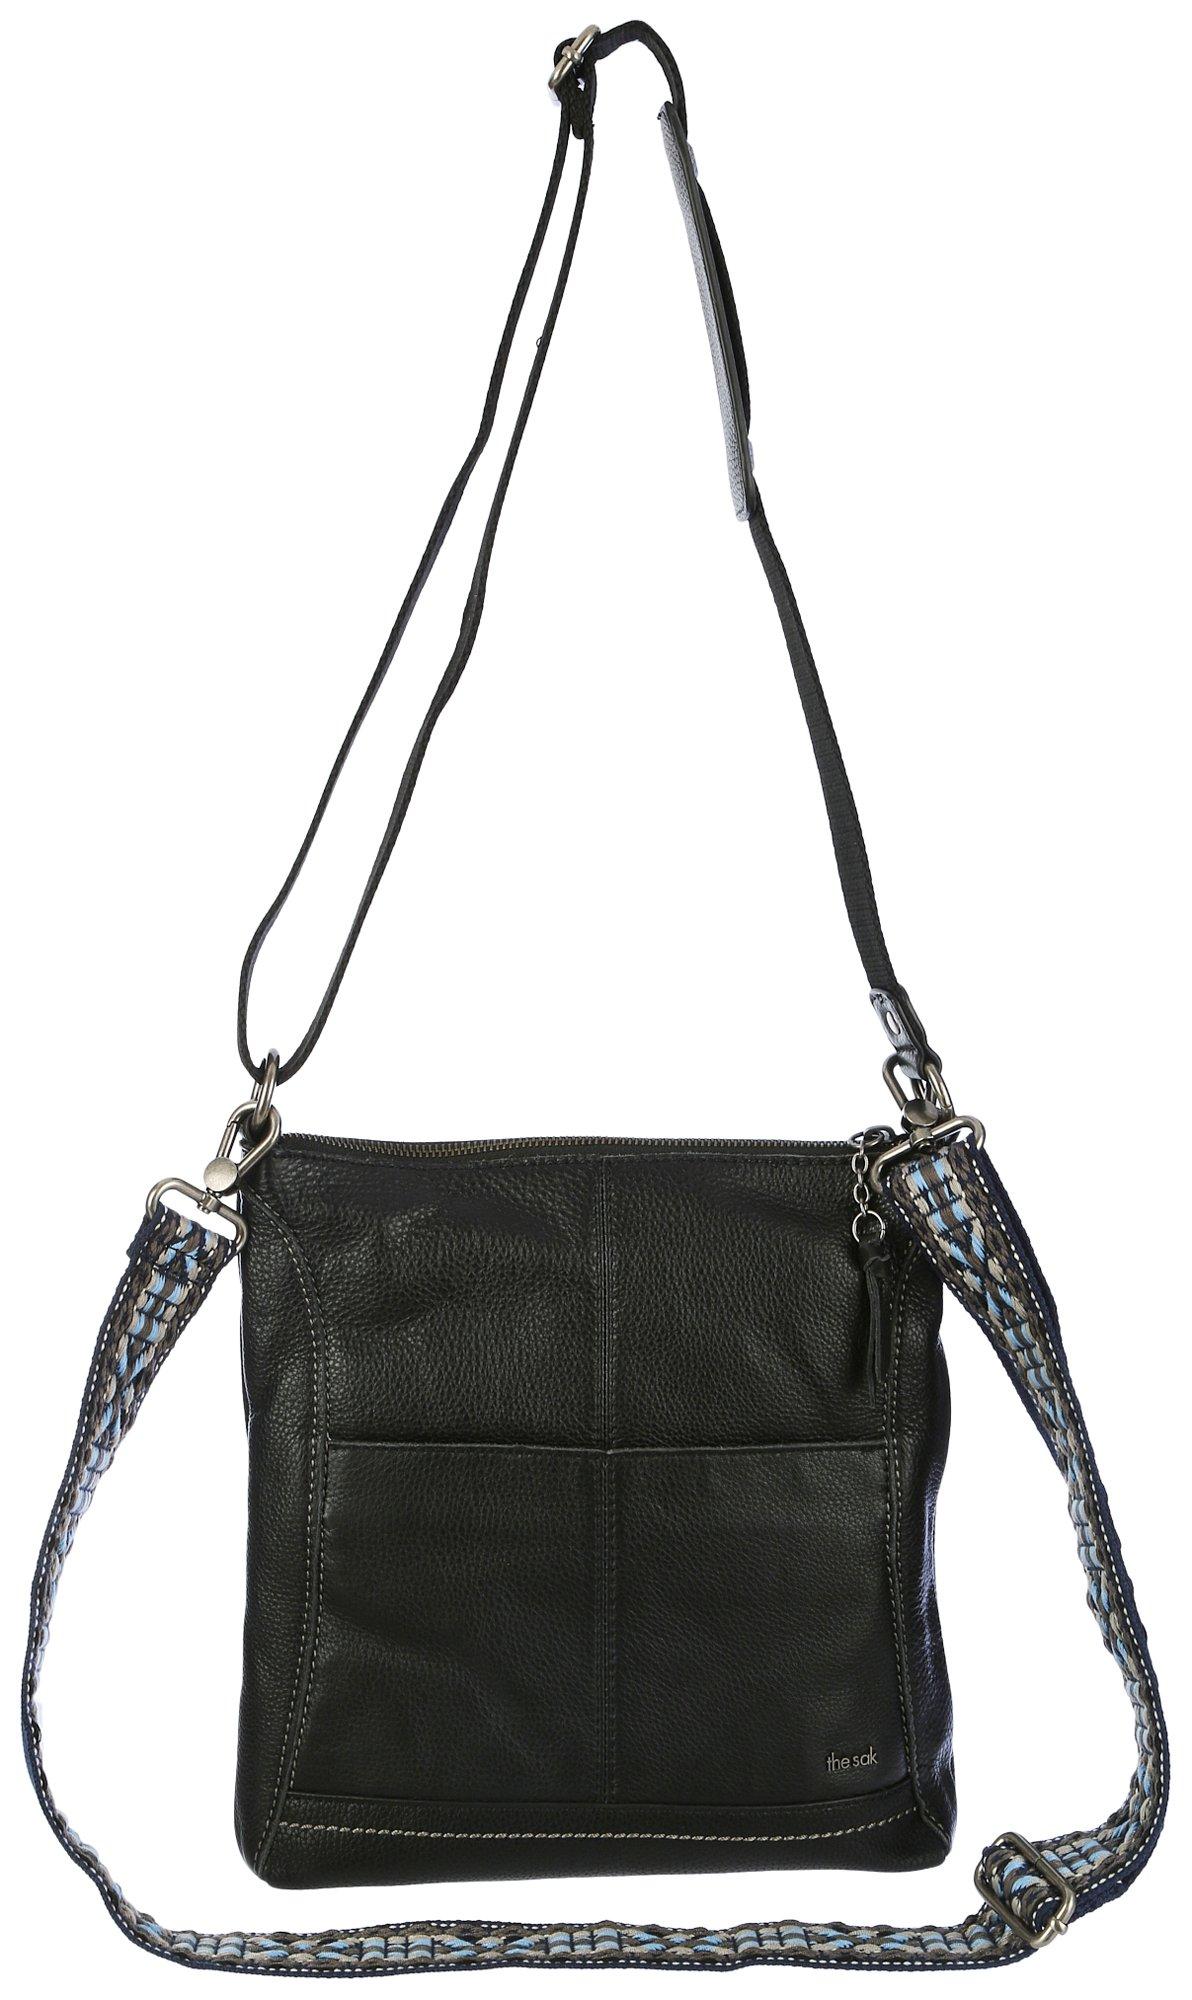 The Sak Lucia Solid Leather Crossbody Bag